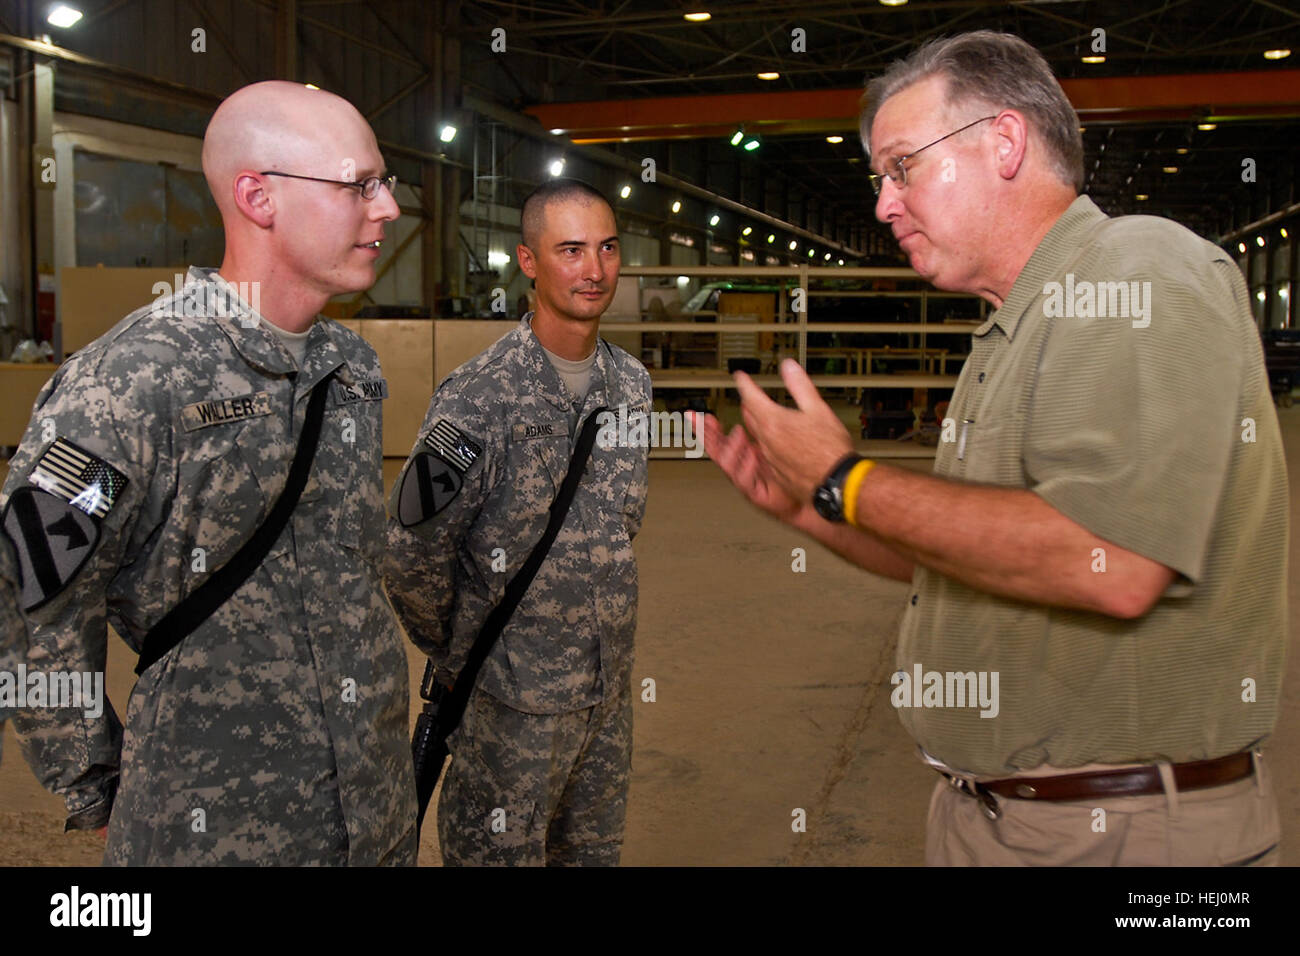 Missouri Gov. Jay Nixon, right, gestures enthusiastically as he discusses baseball with Sgt. Thomas Adams, center, from St. Louis, Mo., transportation coordinator, Headquarters Support Company, 615th Aviation Support Battalion, 1st Air Cavalry Brigade, 1st Cavalry Division, Multi-National Division - Baghdad and Spc. Scott Waller, from Steelville, Mo., armament support, Company B, 615th ASB, 1st ACB, July 18, at Camp Taji, Iraq. Nixon was part of a visit which also included governors from Illinois, Minnesota, Nevada and Texas. State governors visit 1st Air Cavalry Brigade 188839 Stock Photo